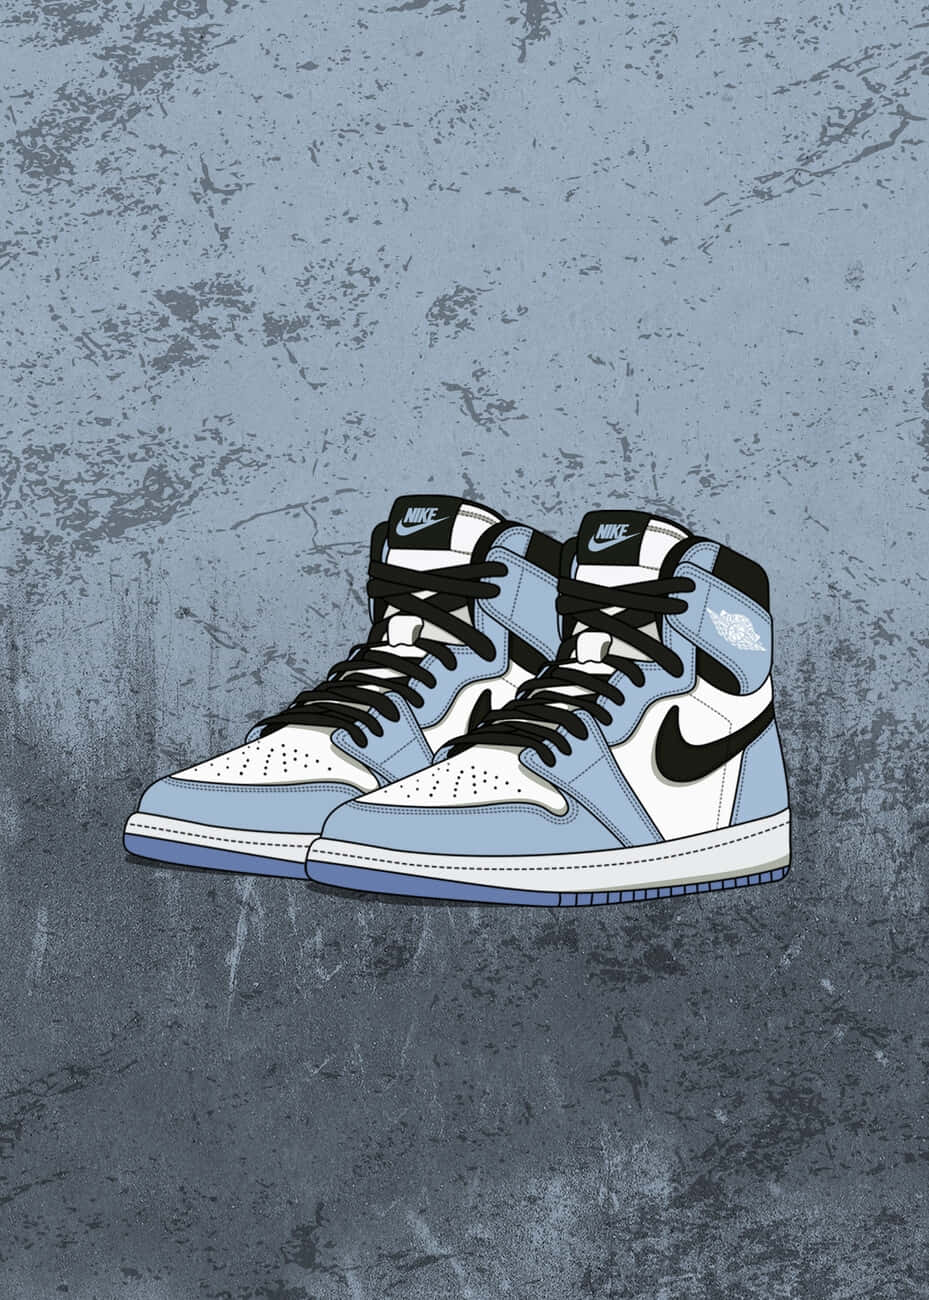 Blue High Top Sneakers Illustration Wallpaper